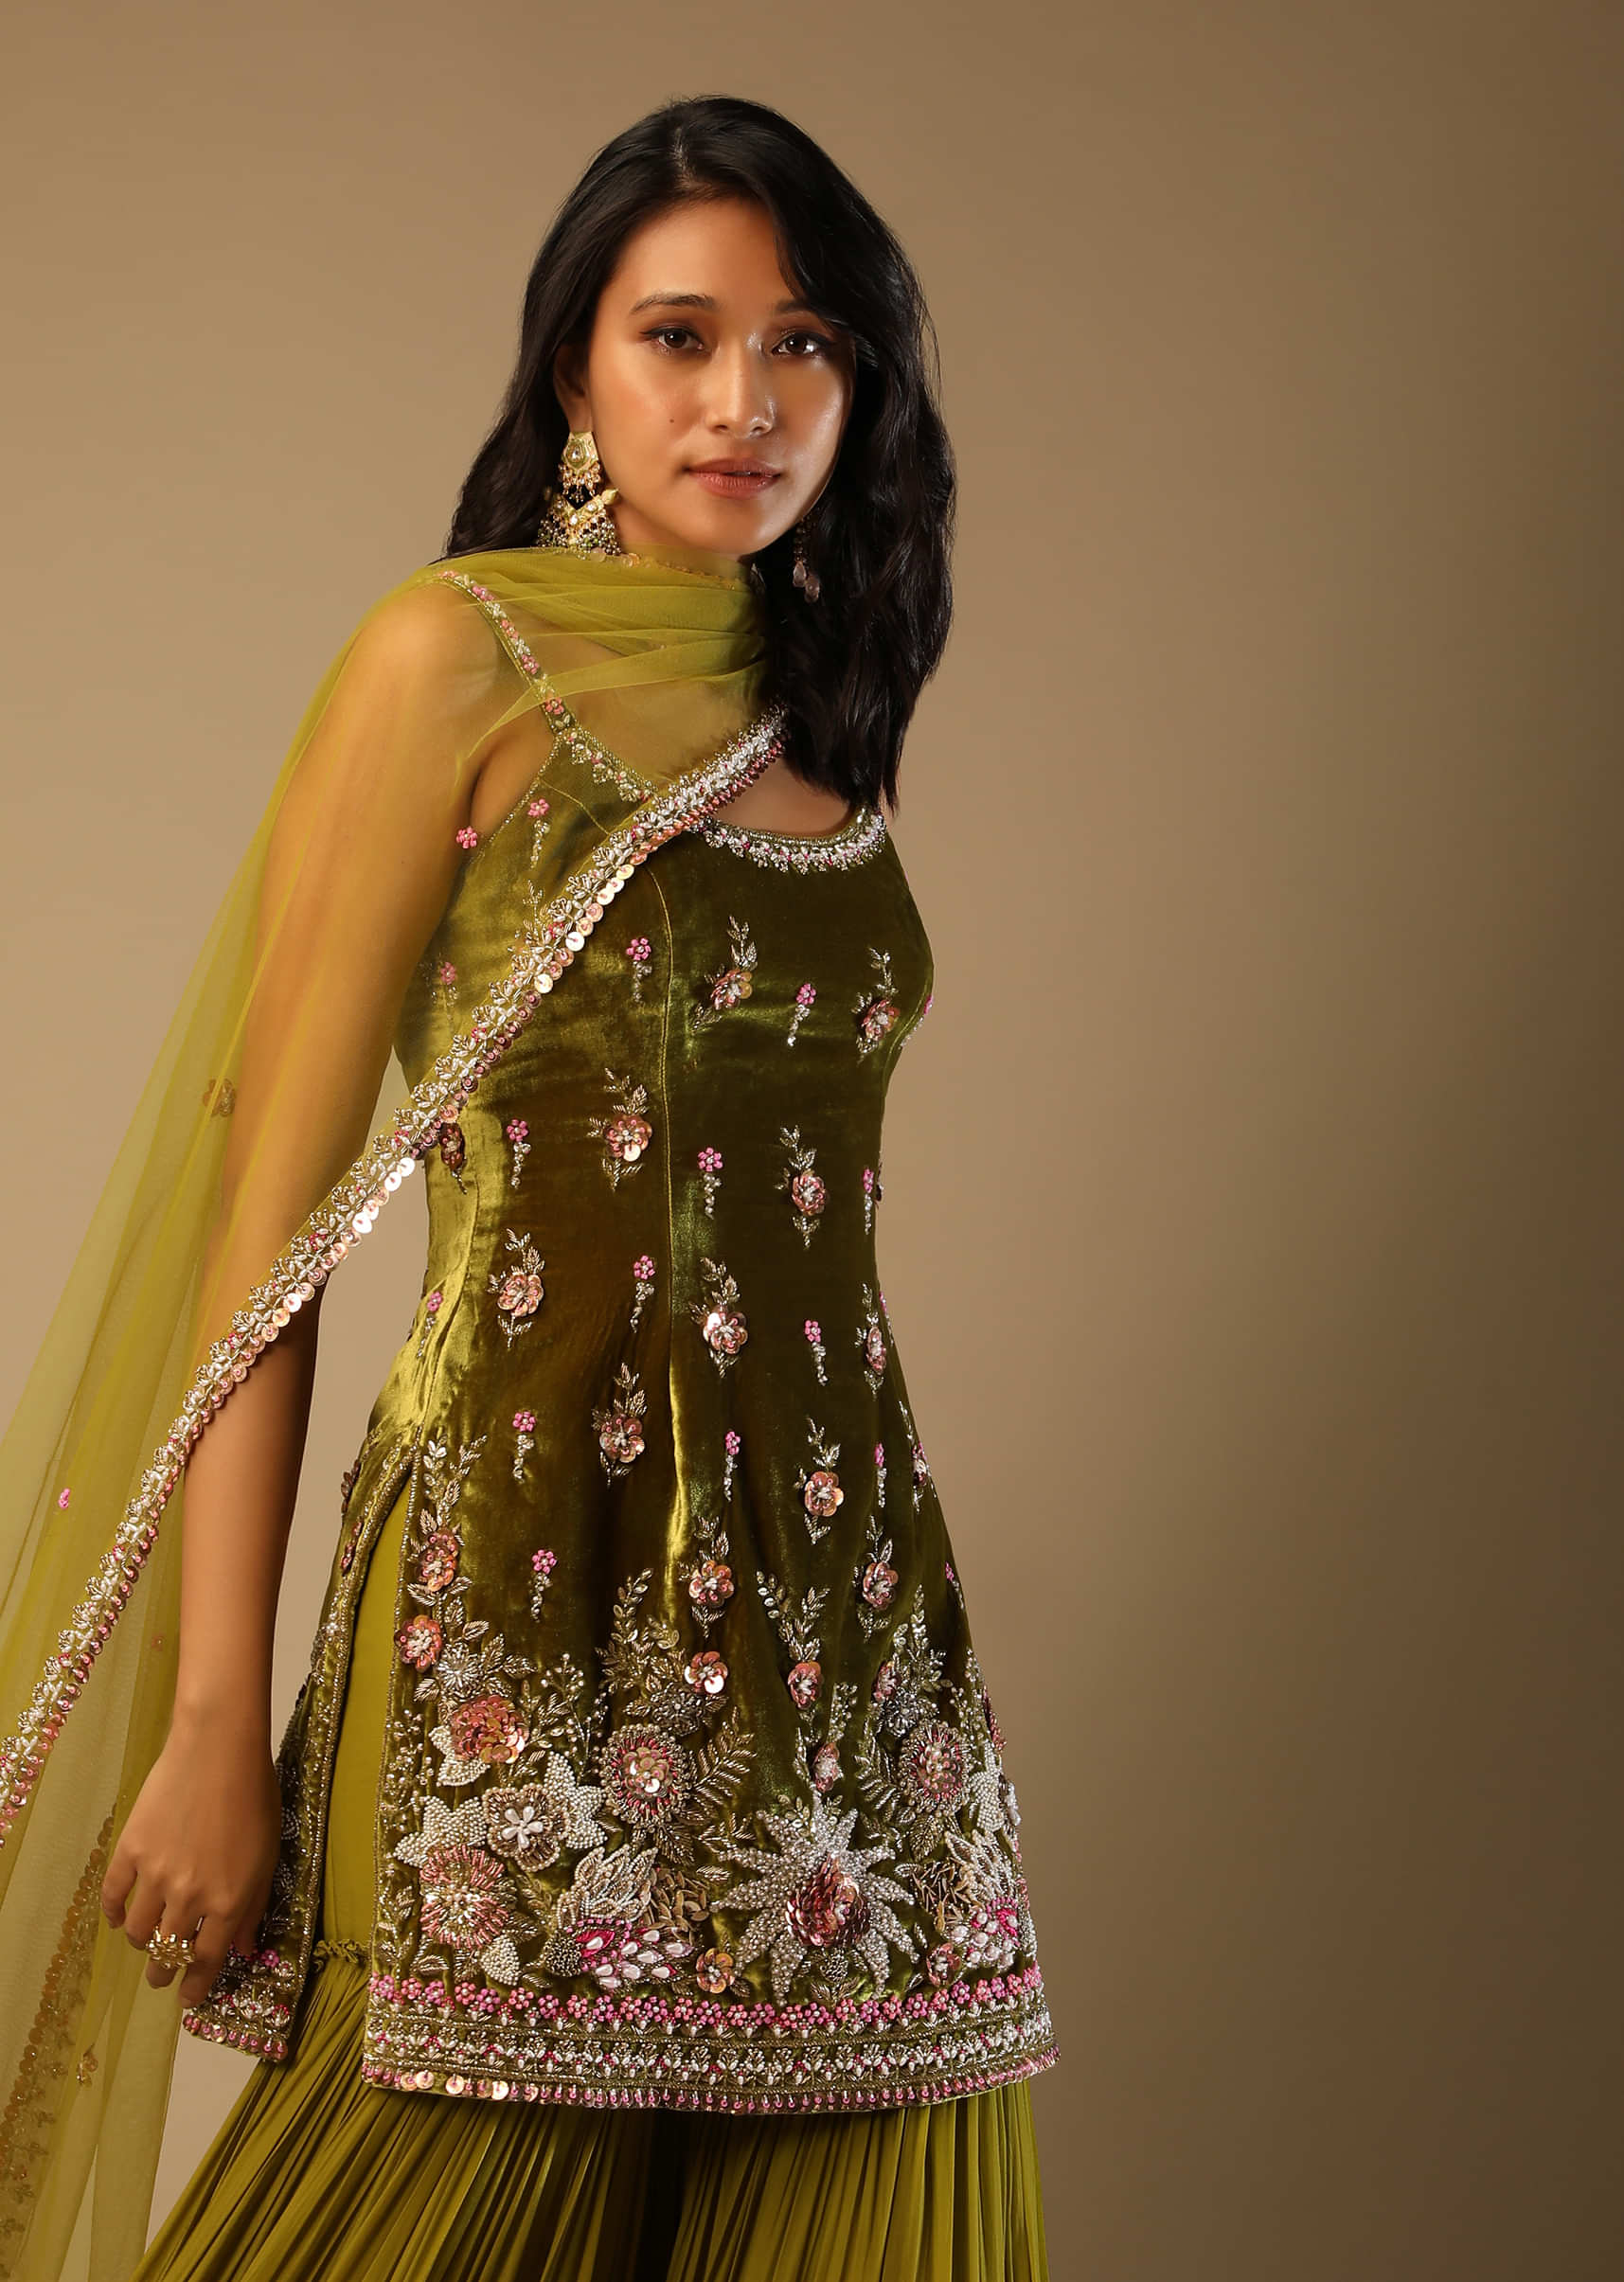 Moss Green Sharara Suit In Velvet With Multi Colored Hand Embroidery In Floral Motifs  